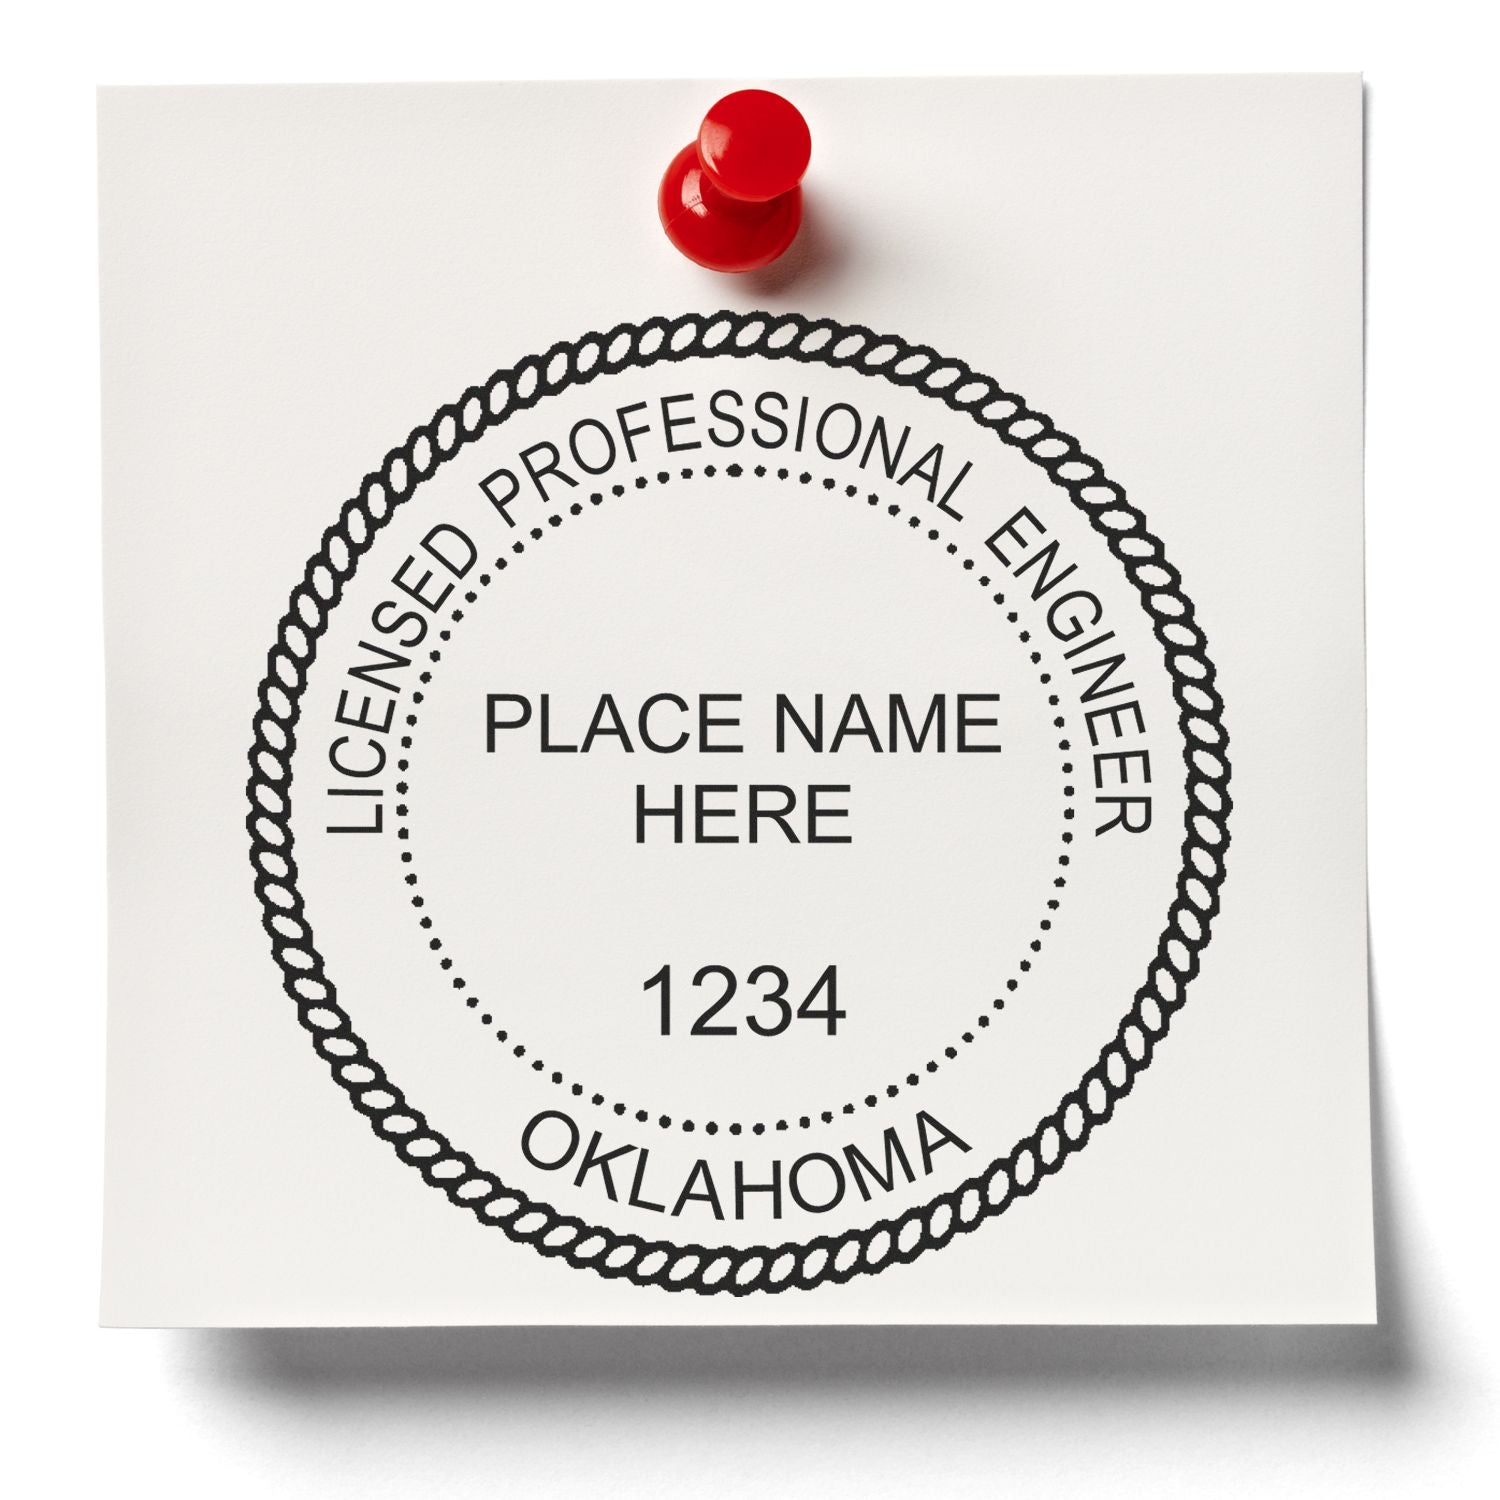 Another Example of a stamped impression of the Oklahoma Professional Engineer Seal Stamp on a piece of office paper.